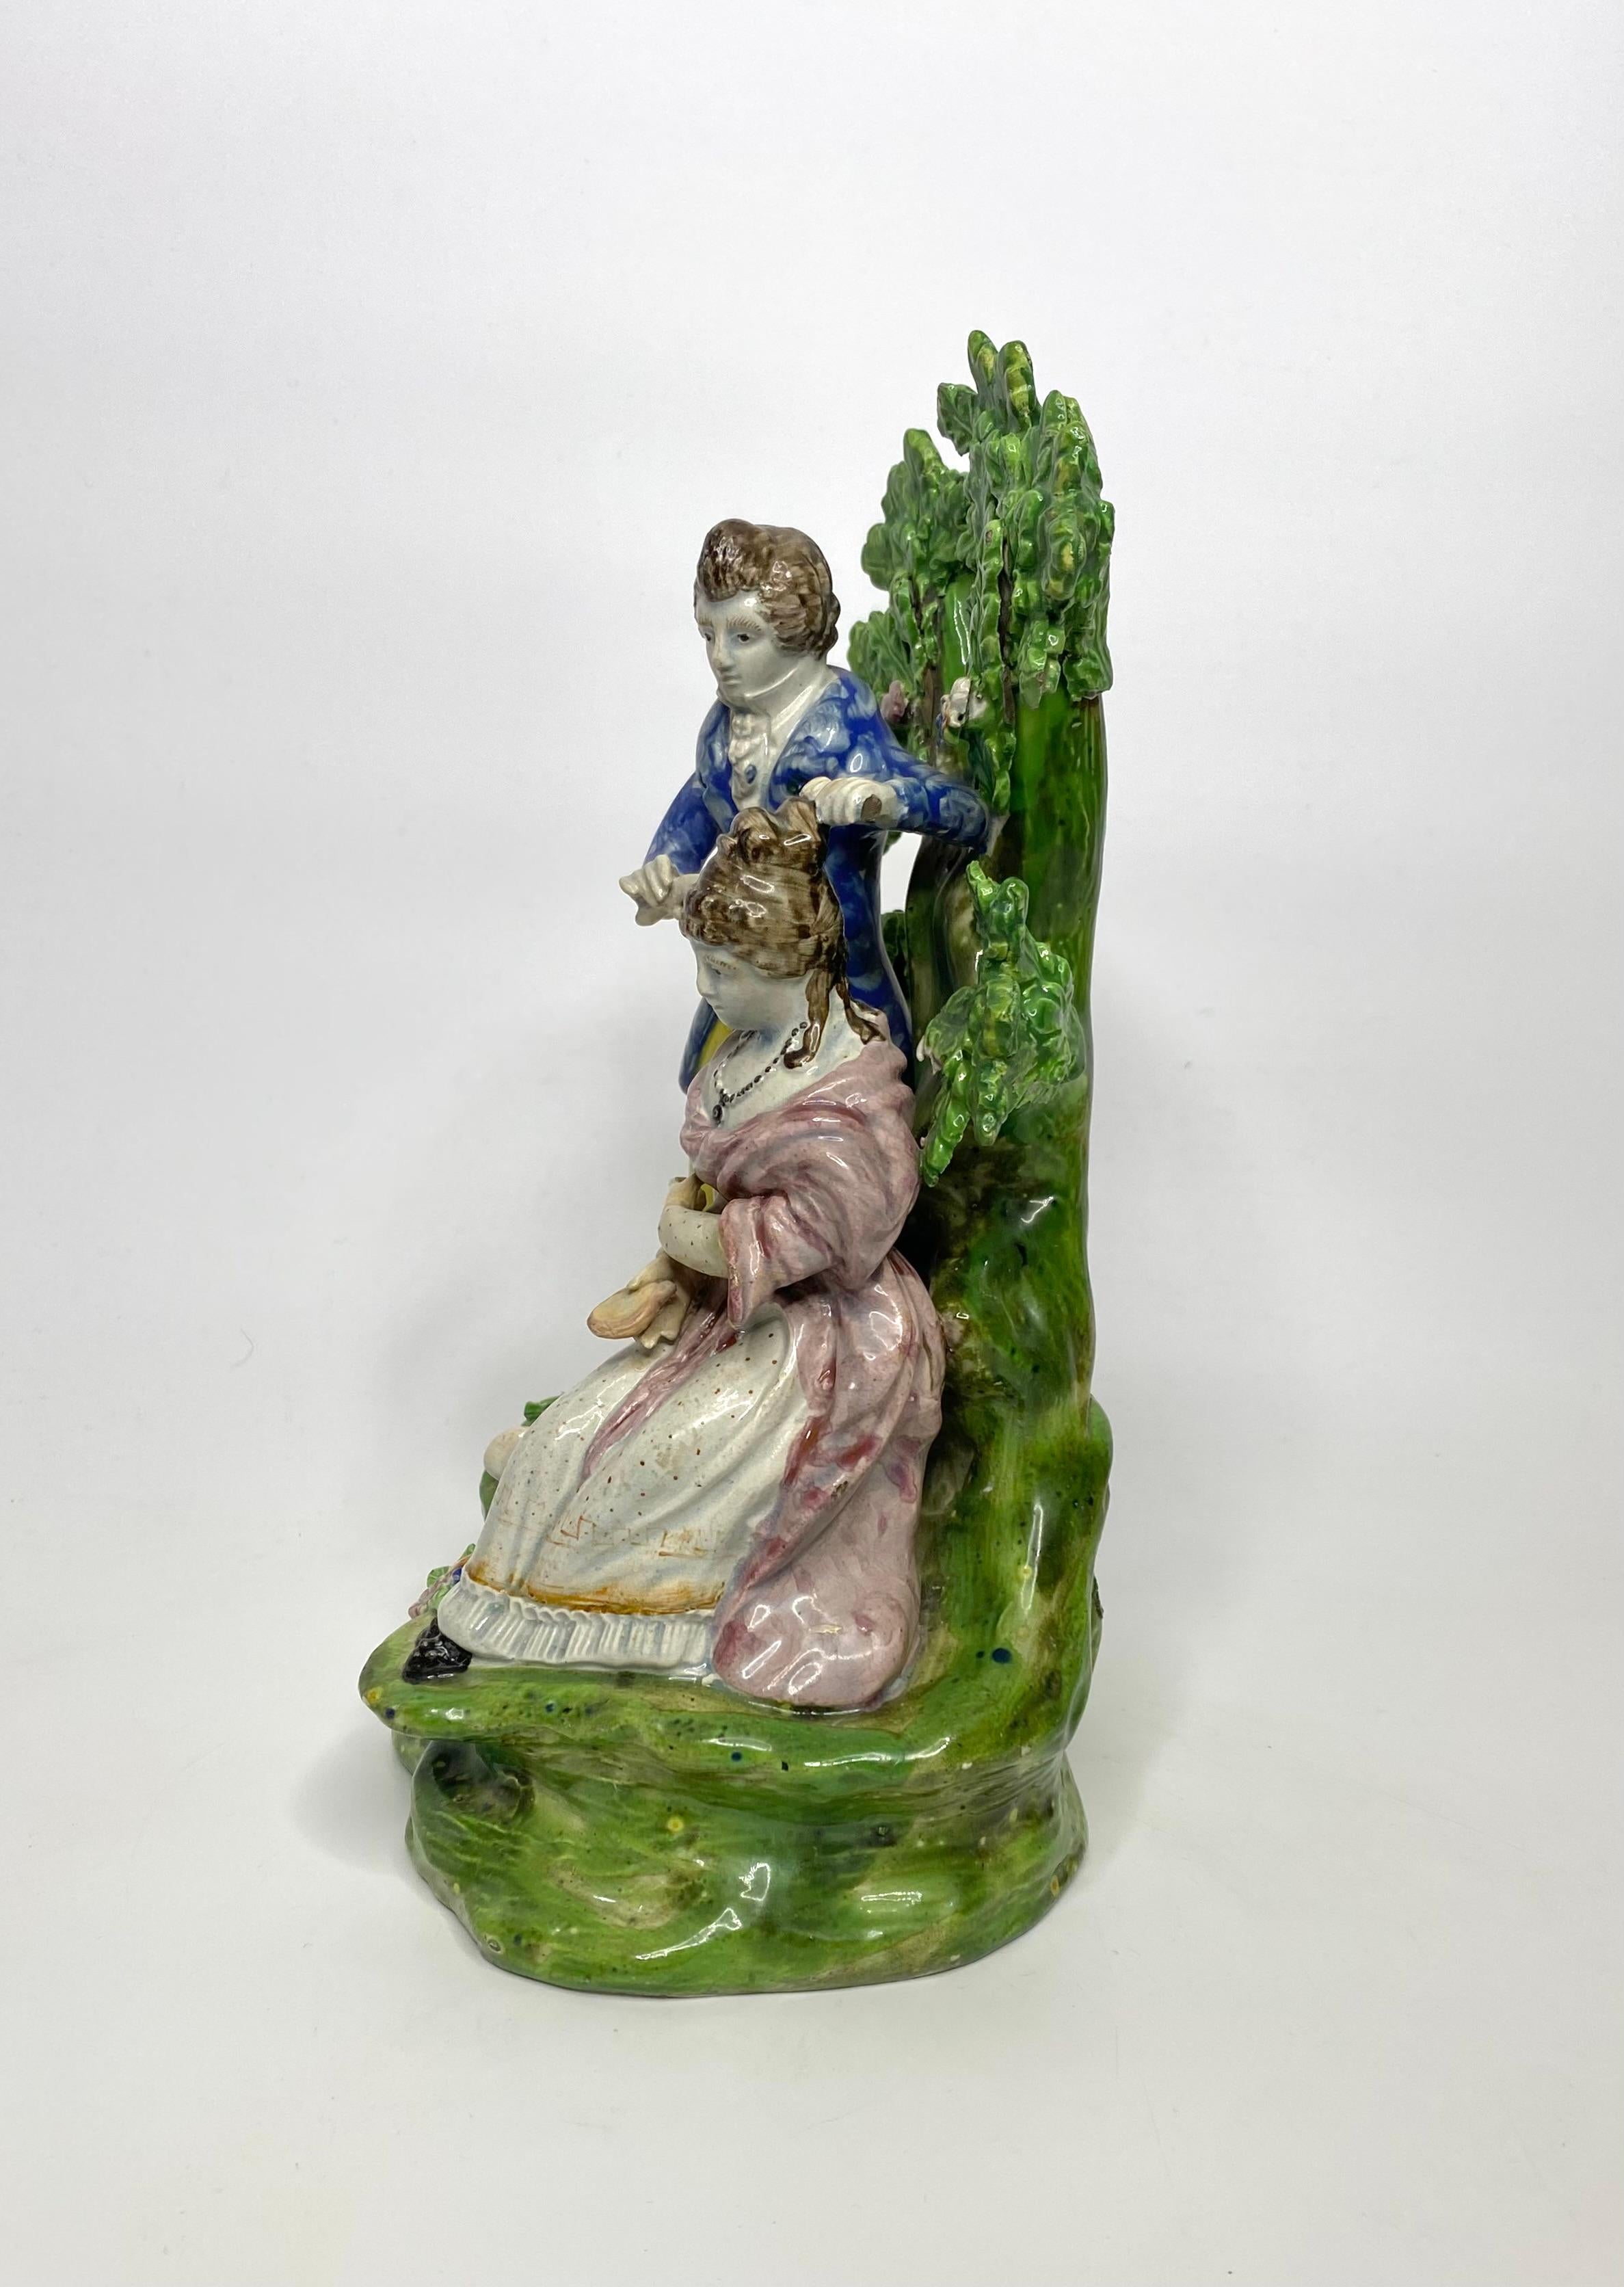 Staffordshire pottery bocage group of large size, ‘Hairdresser’, c. 1820. The very well modelled group, depicting a man curing the hair of a seated lady, whilst she looks in a hand mirror. The figures, dressed in 18th Century costume,, before an